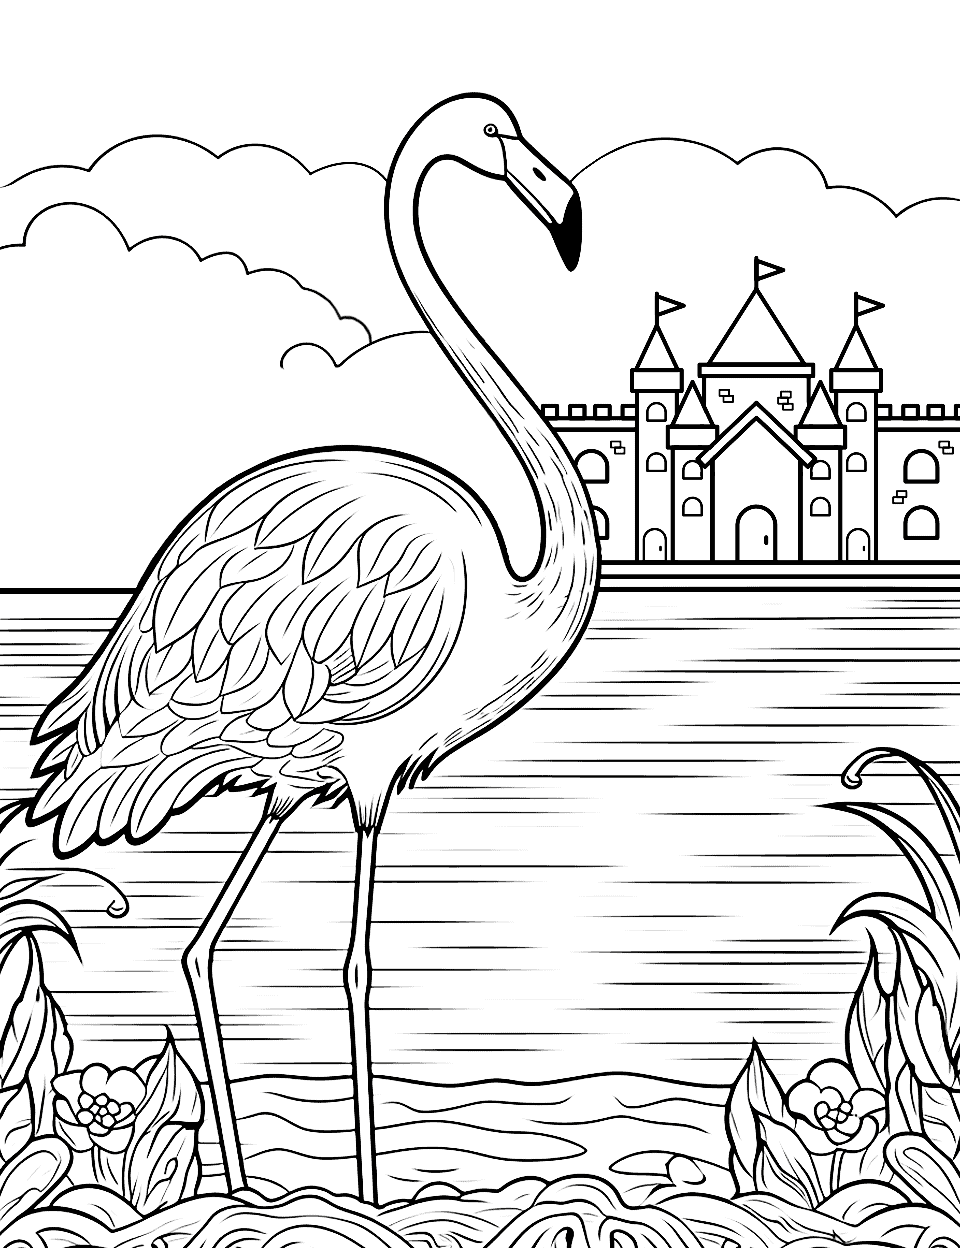 Mythical Flamingo in a Fantasy Land Coloring Page - A whimsical scene featuring a flamingo in a fantasy setting, with castles and clouds in the background.